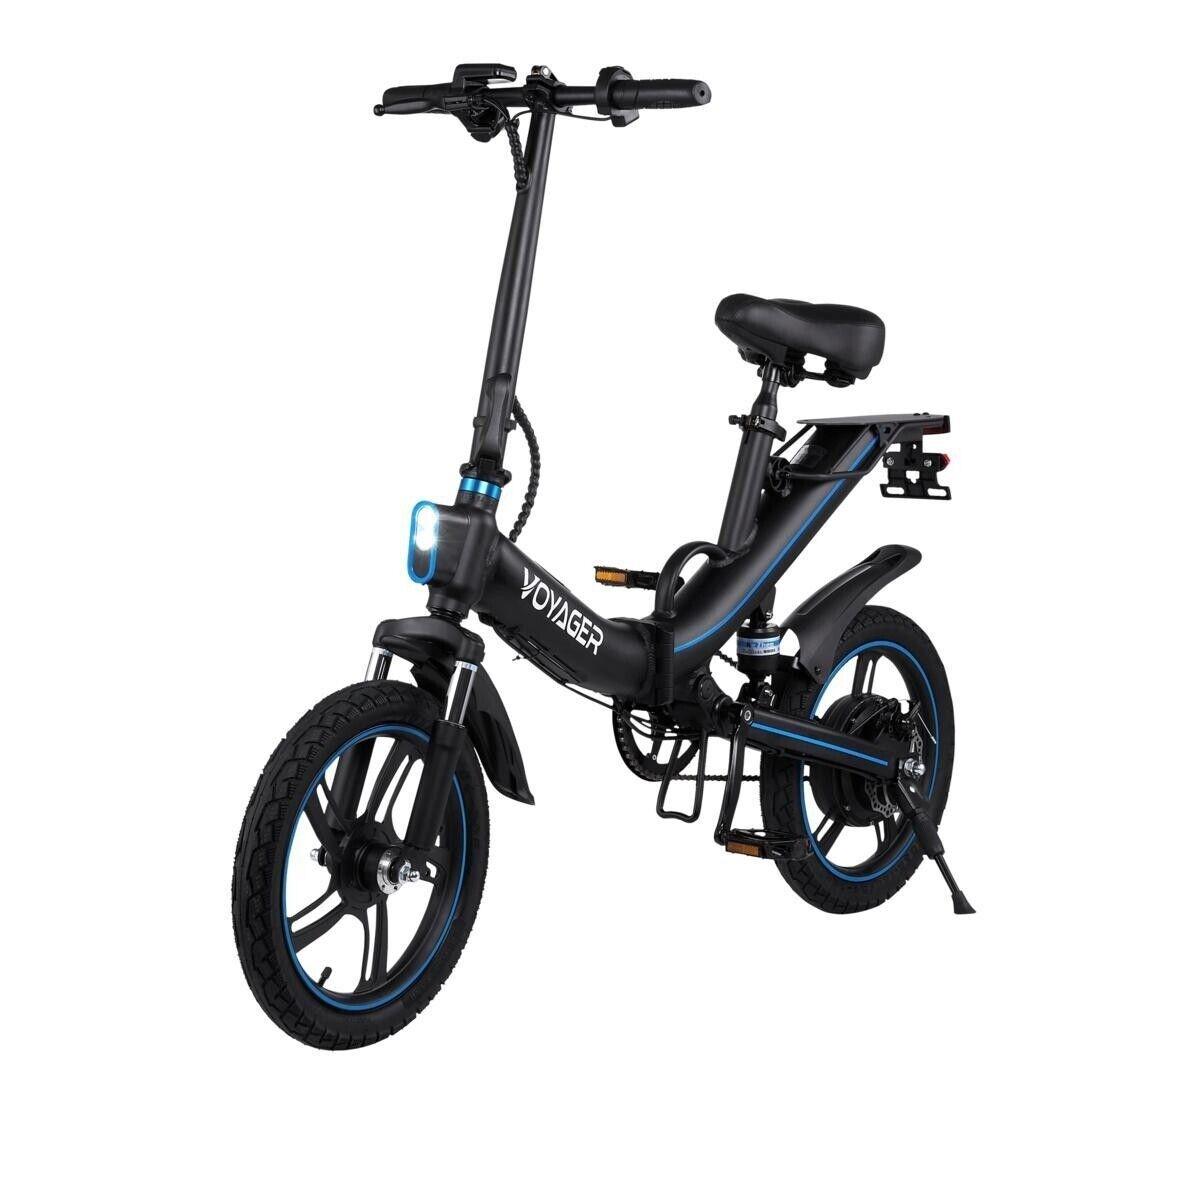 Voyager Radius Pro Foldable Electric Bike for $434.99 Shipped